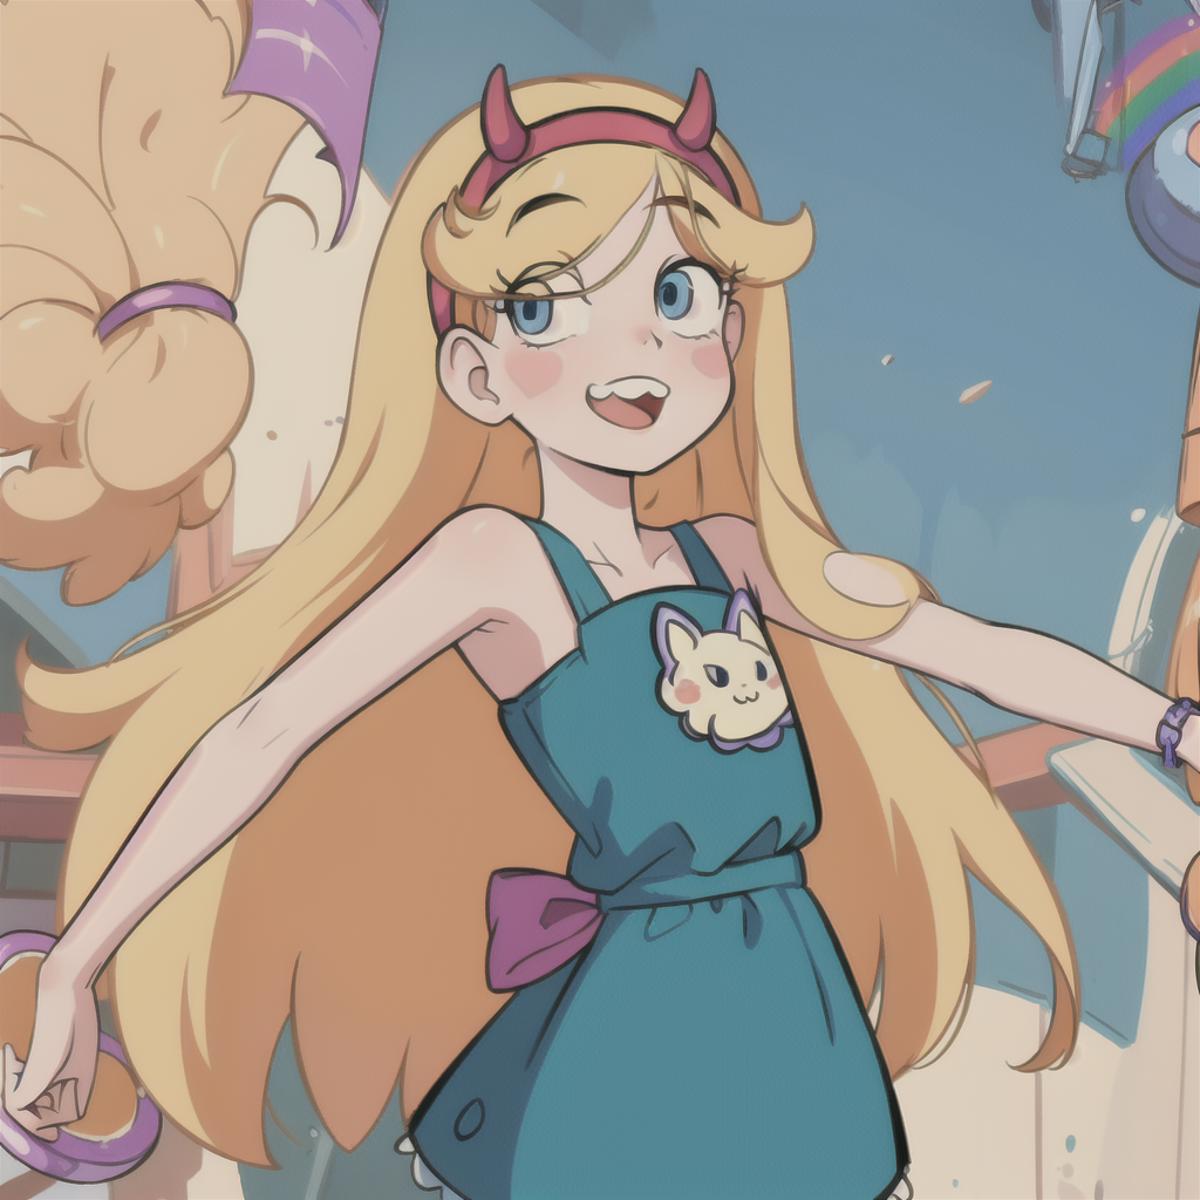 Star vs. the forces of evil - Star Butterfly image by starandmarco0o630